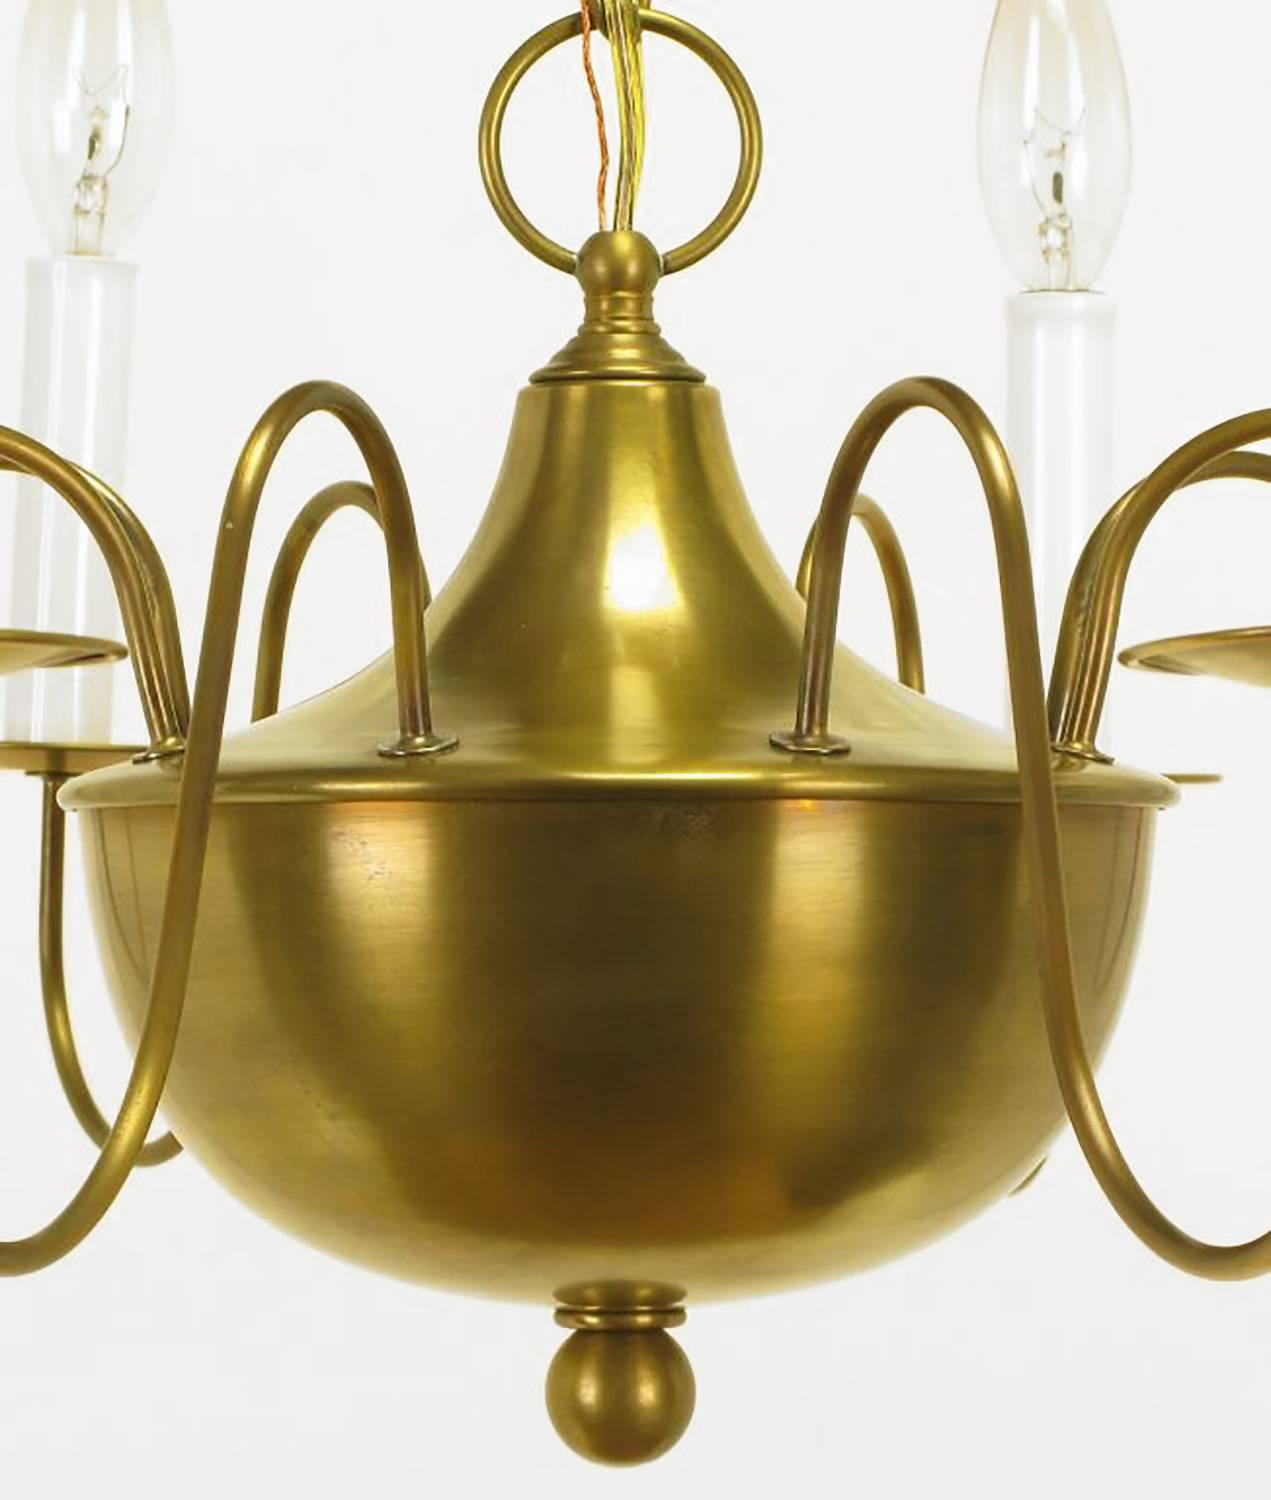 Fine Hand-Spun Brass Eight-Light Chandelier with Delicate Arms For Sale 2